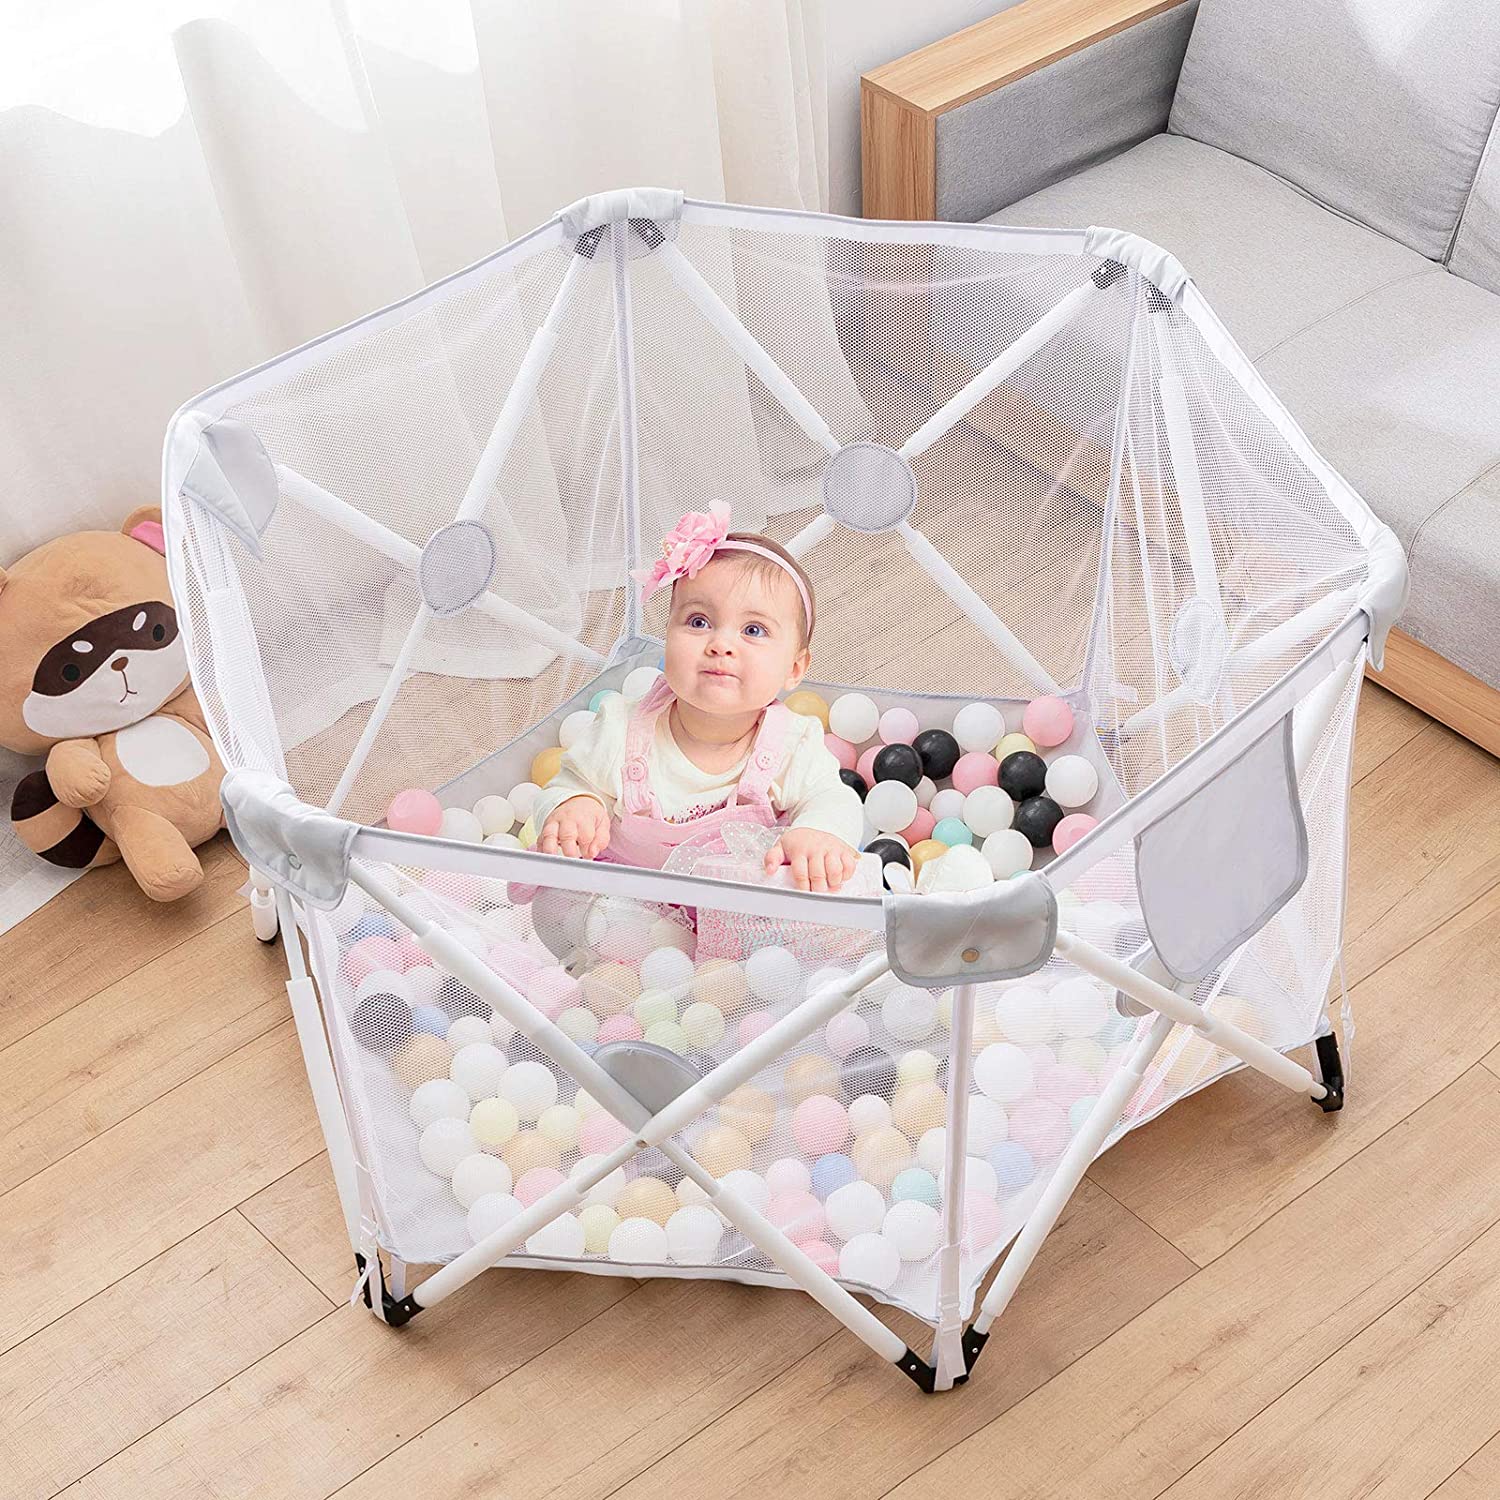 Arkmiido Baby playpen, Playpen for Baby Foldable and Portable, Hexagonal Folding Playpen with Breathable Mesh and Storage Bag, Indoor and Outdoor Play for 0-4 Ages (Grey) Featured Image